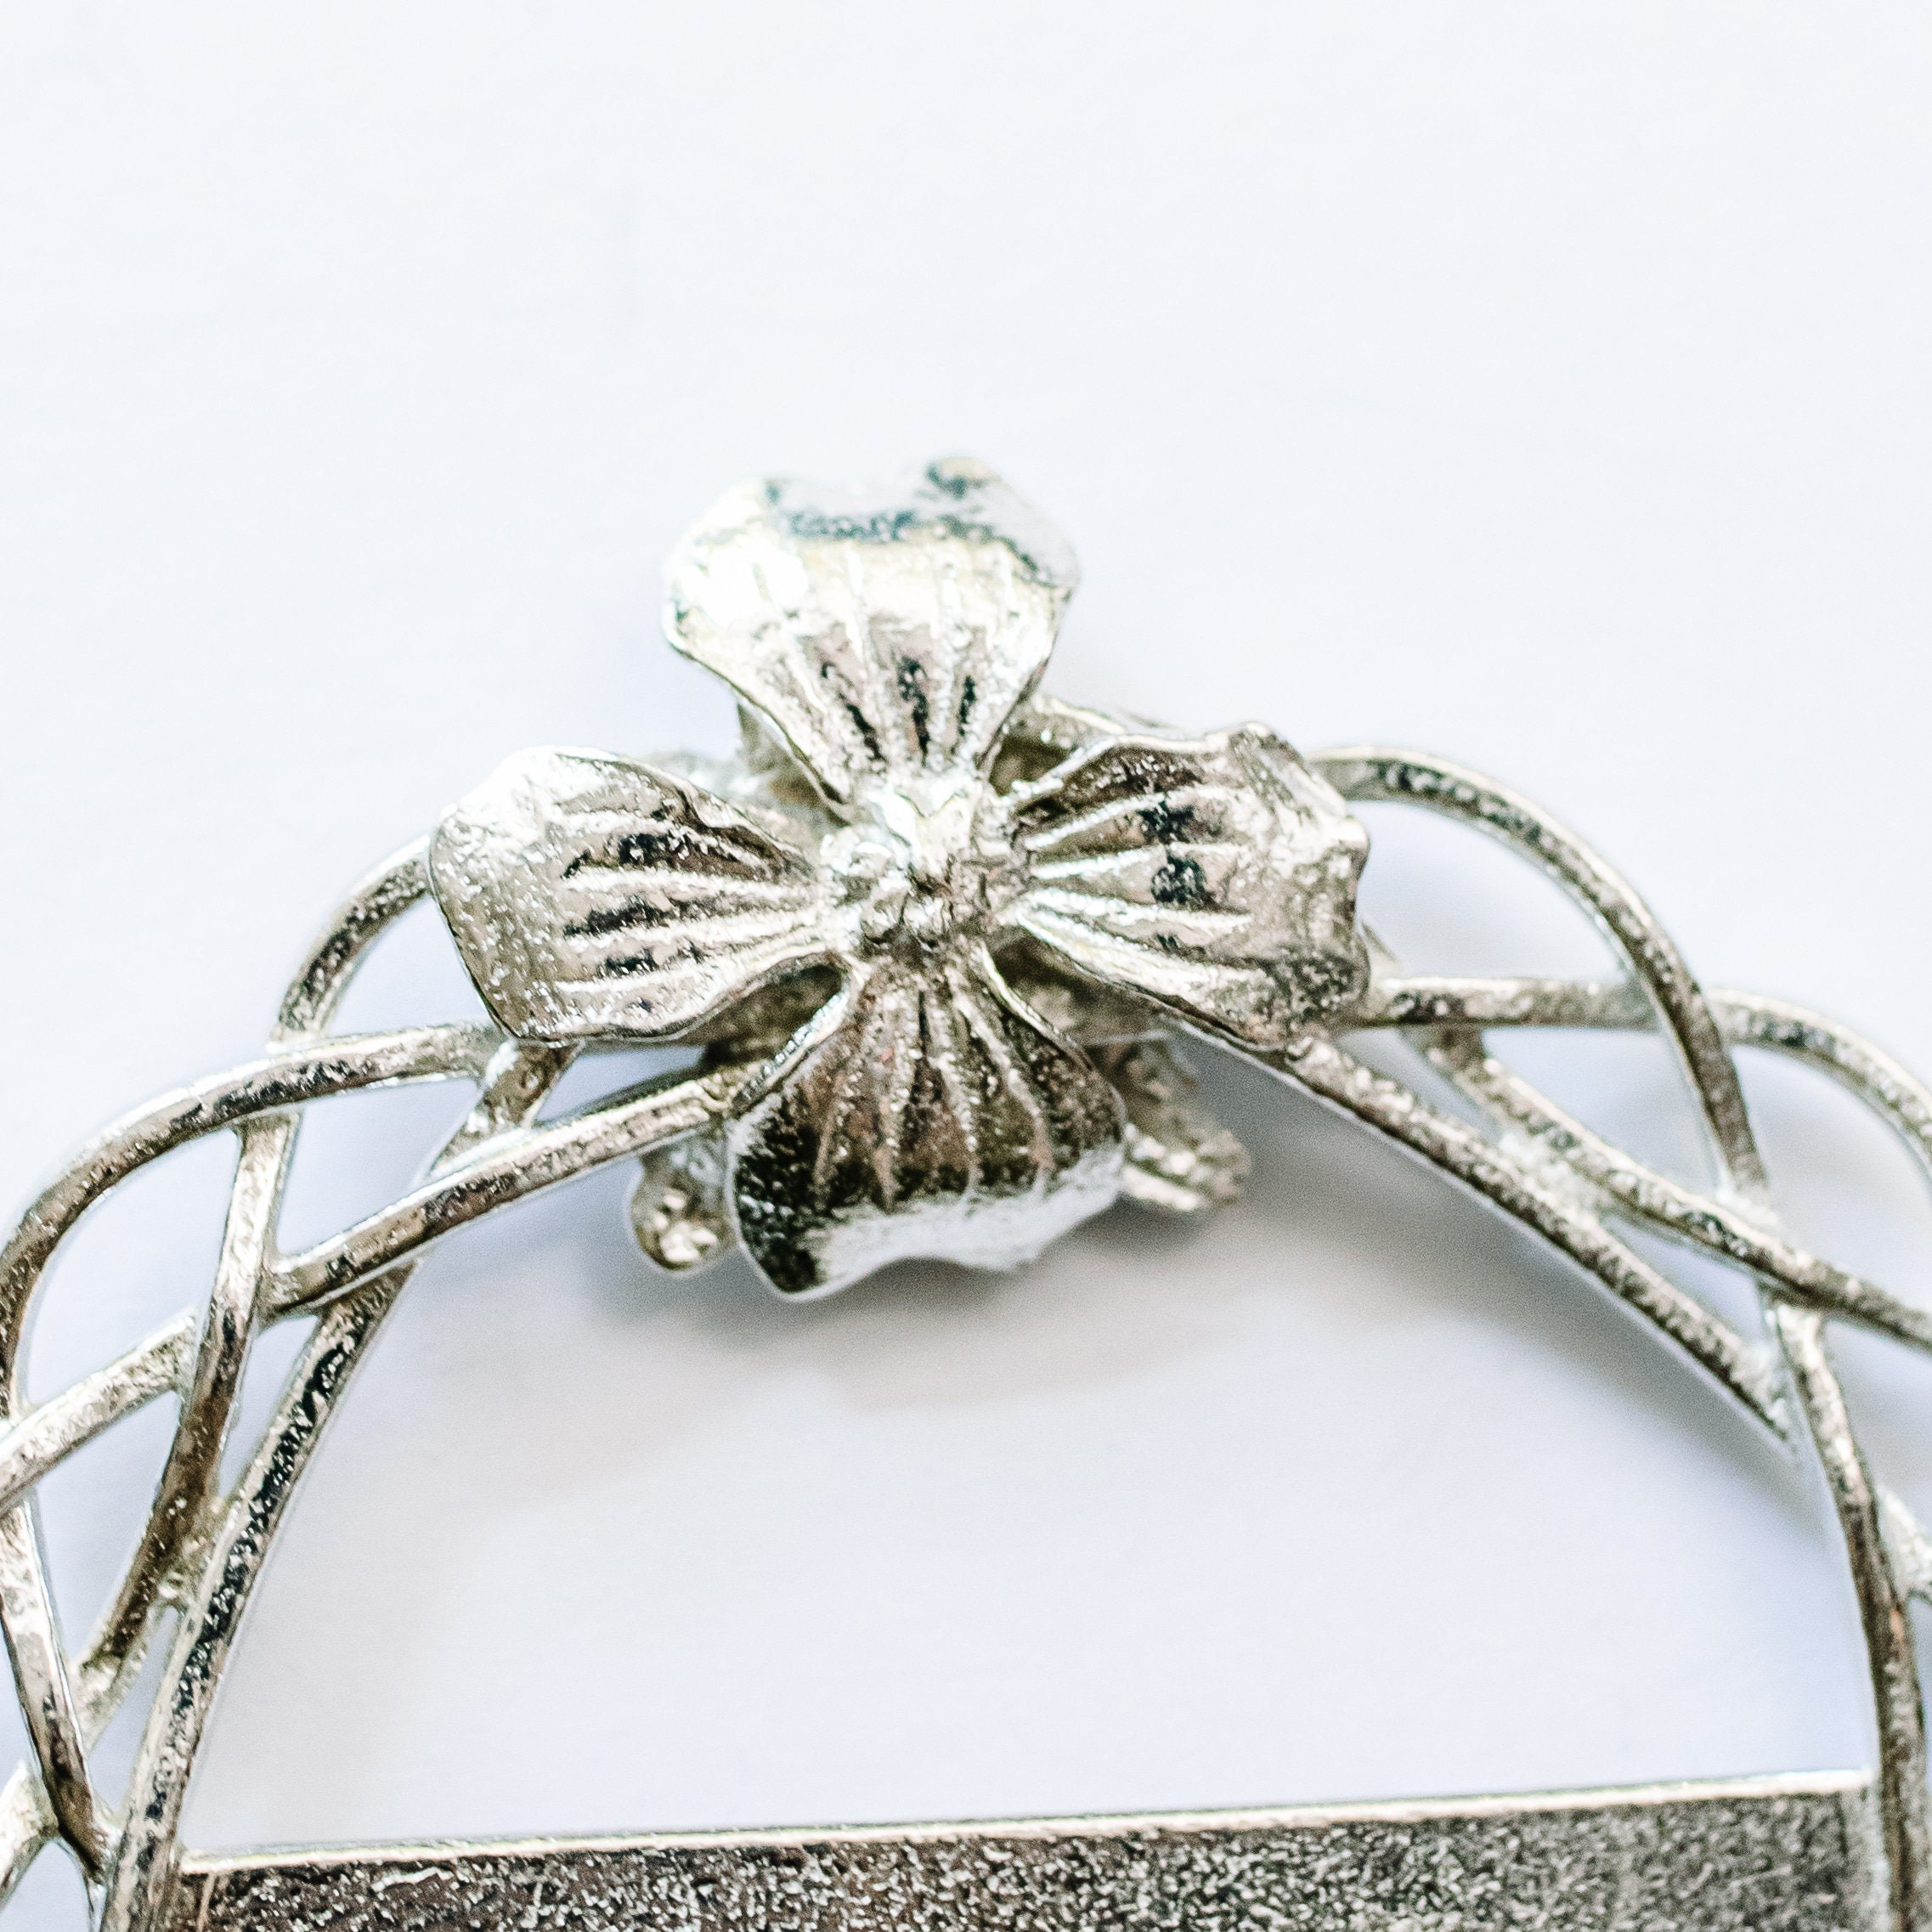 Pewter Dogwood Scarf Ring - Flower Scarf Slide for Scarves - Plain or Reversible with Starfish Reversible Dogwood and Starfish Scarf Ring